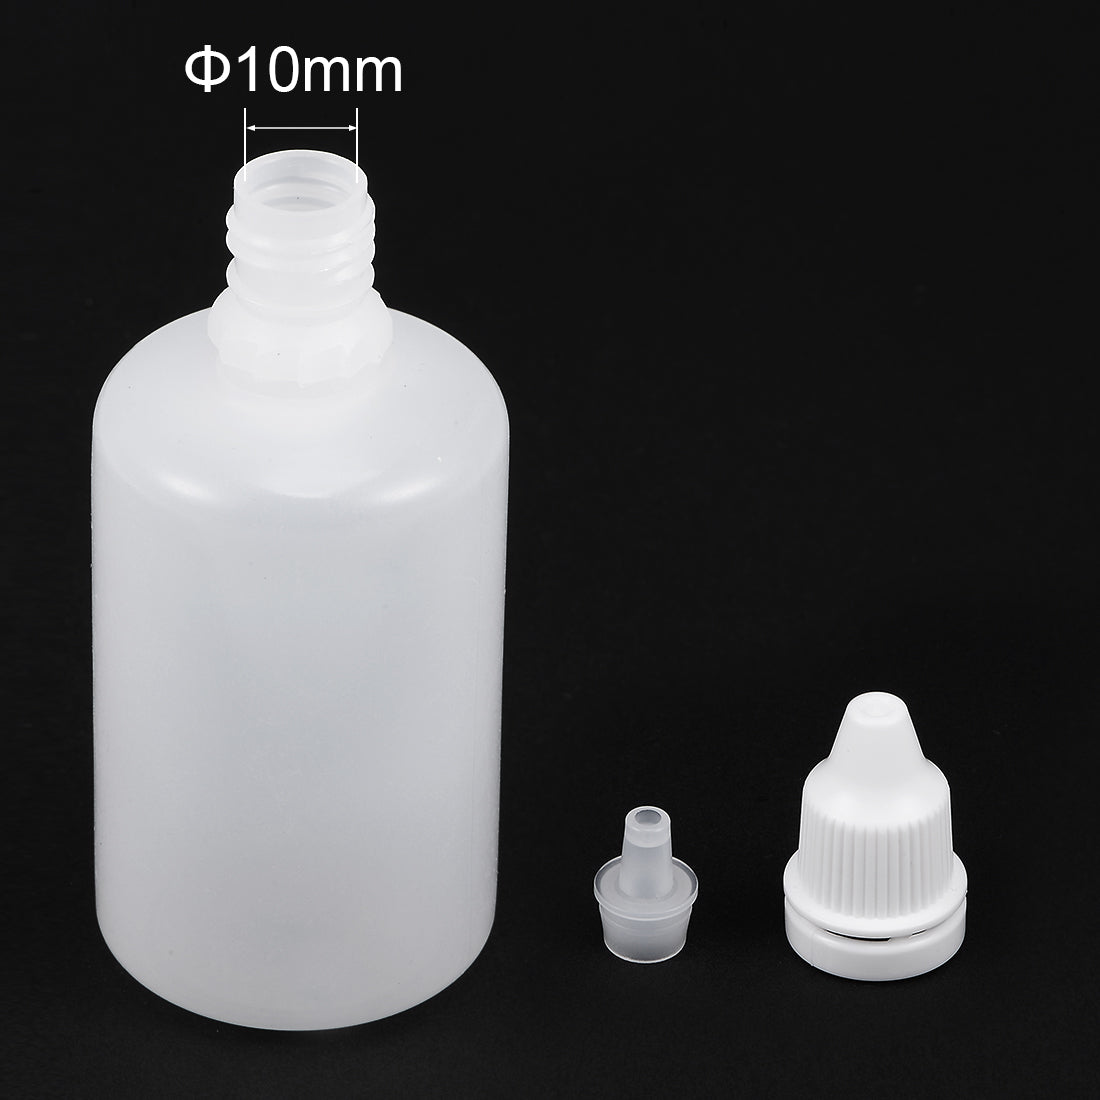 uxcell Uxcell 50ml/1.7 oz Empty Squeezable Dropper Bottle 5pcs